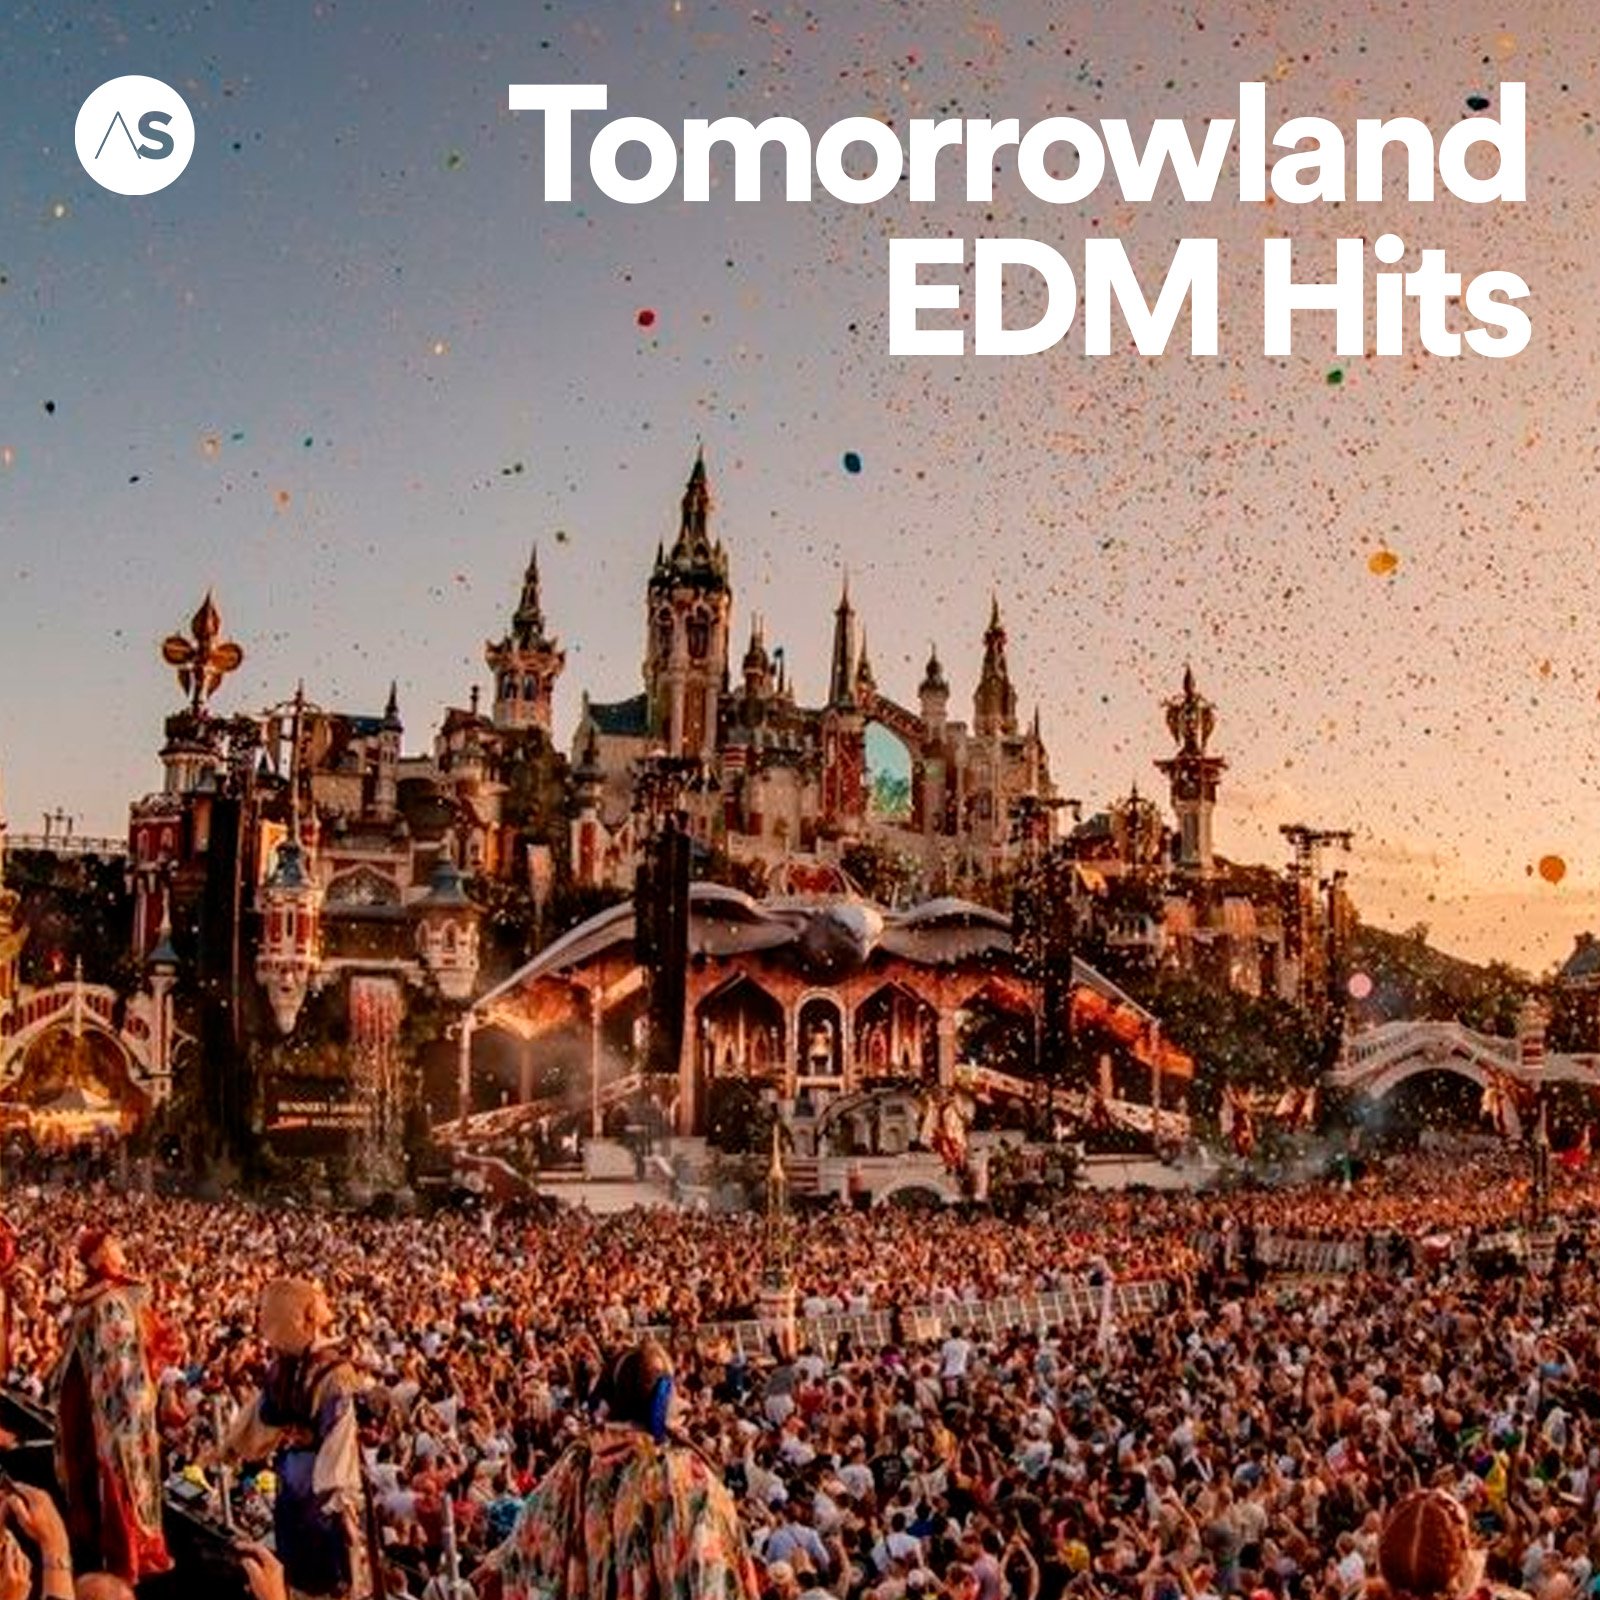 Tomorrowland 2024 • EDM Hits / Today's Top Songs. EDM Electronic Dance Music 2024 • Best Tracks from Tomorrowland • Official Tracklist Dance Anthems • Festival Music Soundtrack • Los Mejores Éxitos de la Electrónica • Electrônicas As Melhores